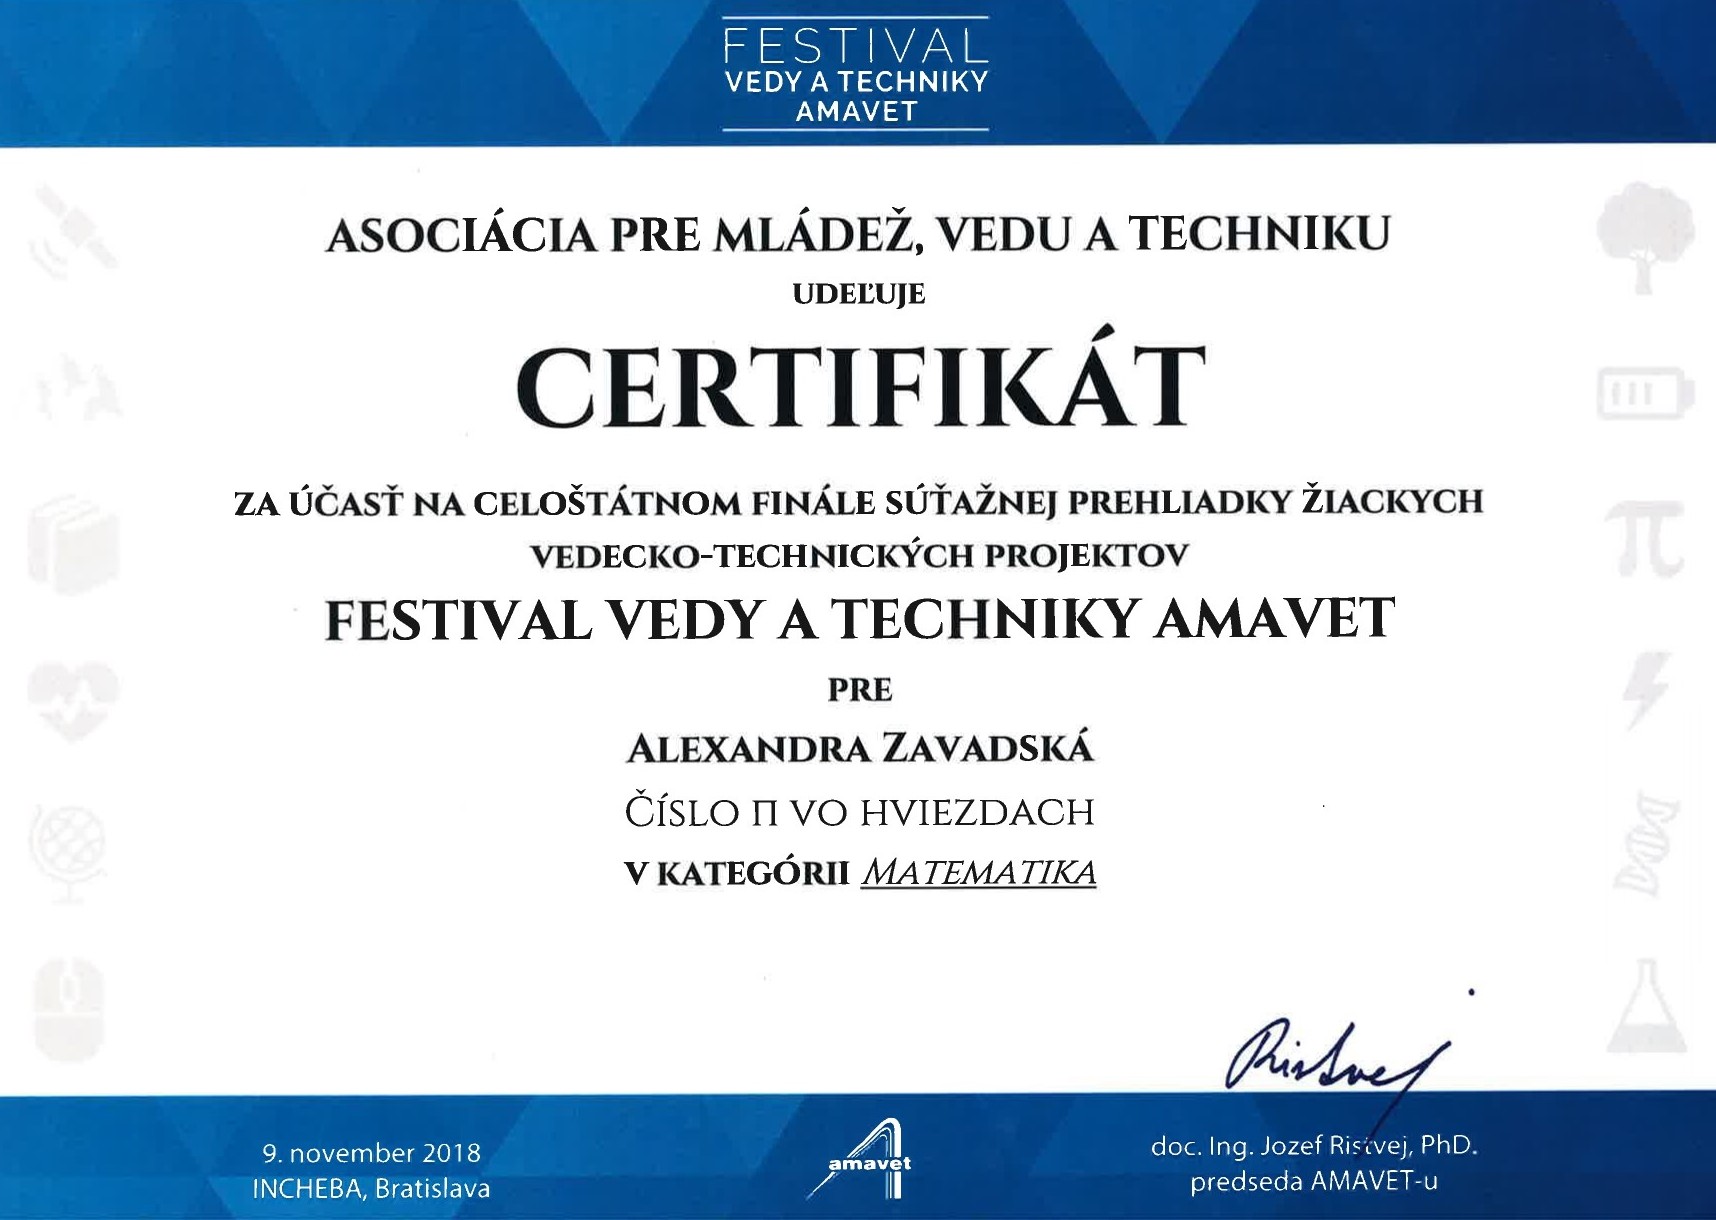 Winner of the Festival of Science and Technics (diploma, category Mathematics), 2018, AMAVET